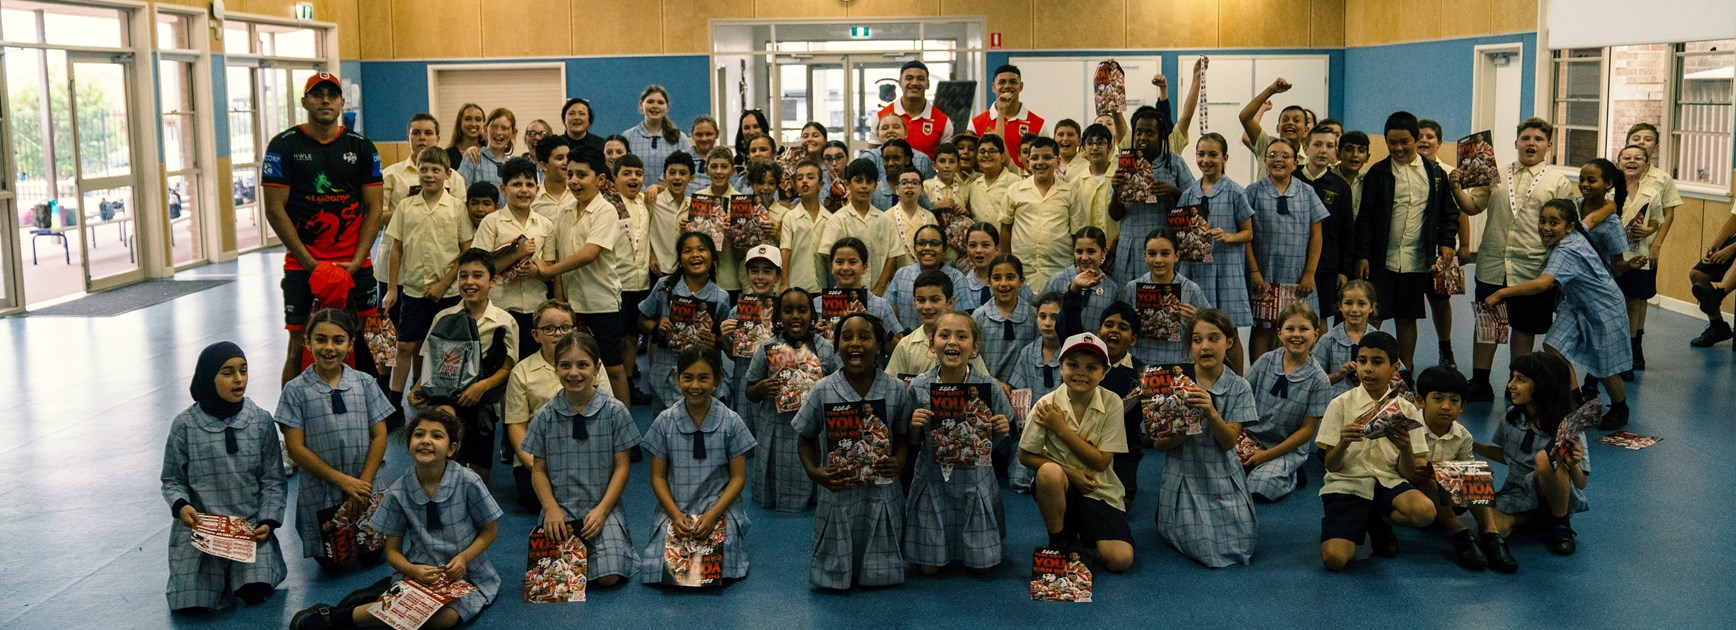 Tyrell Sloan, Sione Finau & Savelio Tamale pose for a group shot with the St Francis of Assisi Catholic Parish Primary School kids.